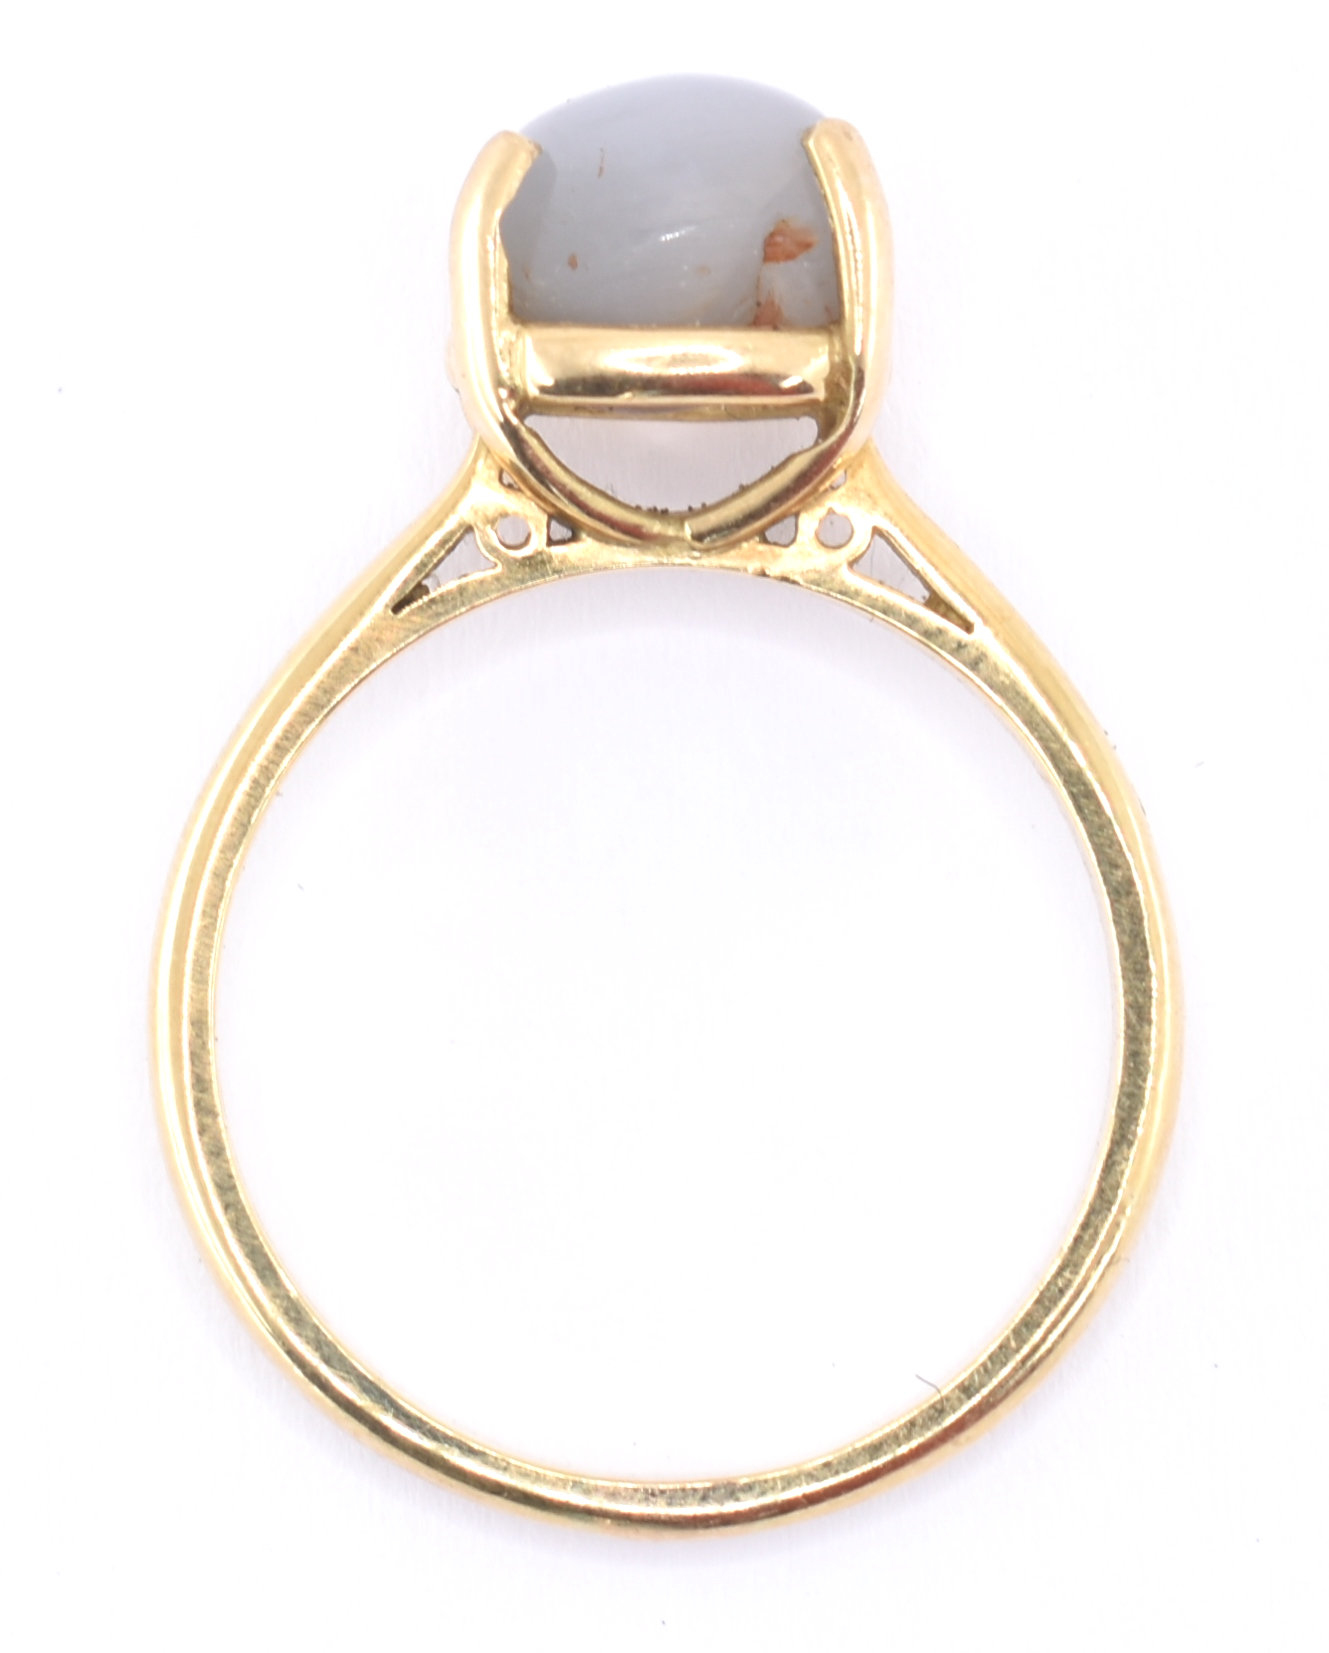 18CT GOLD STAR SAPPHIRE RING - Image 7 of 9